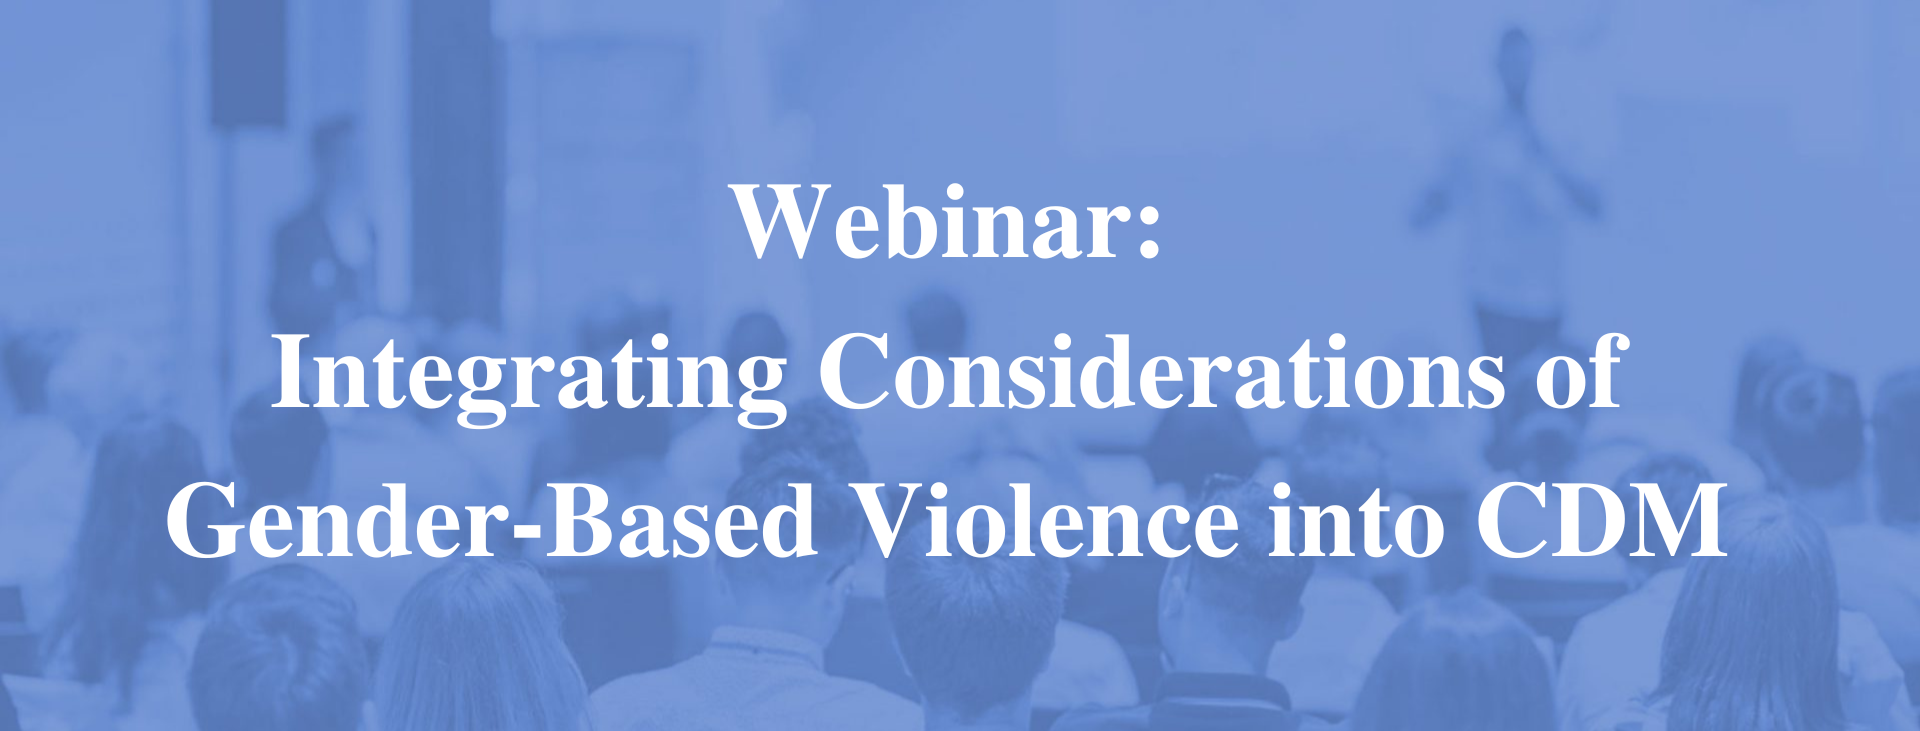 Case Study: Tool for Integrating Gender-Based Violence Issues into CDM